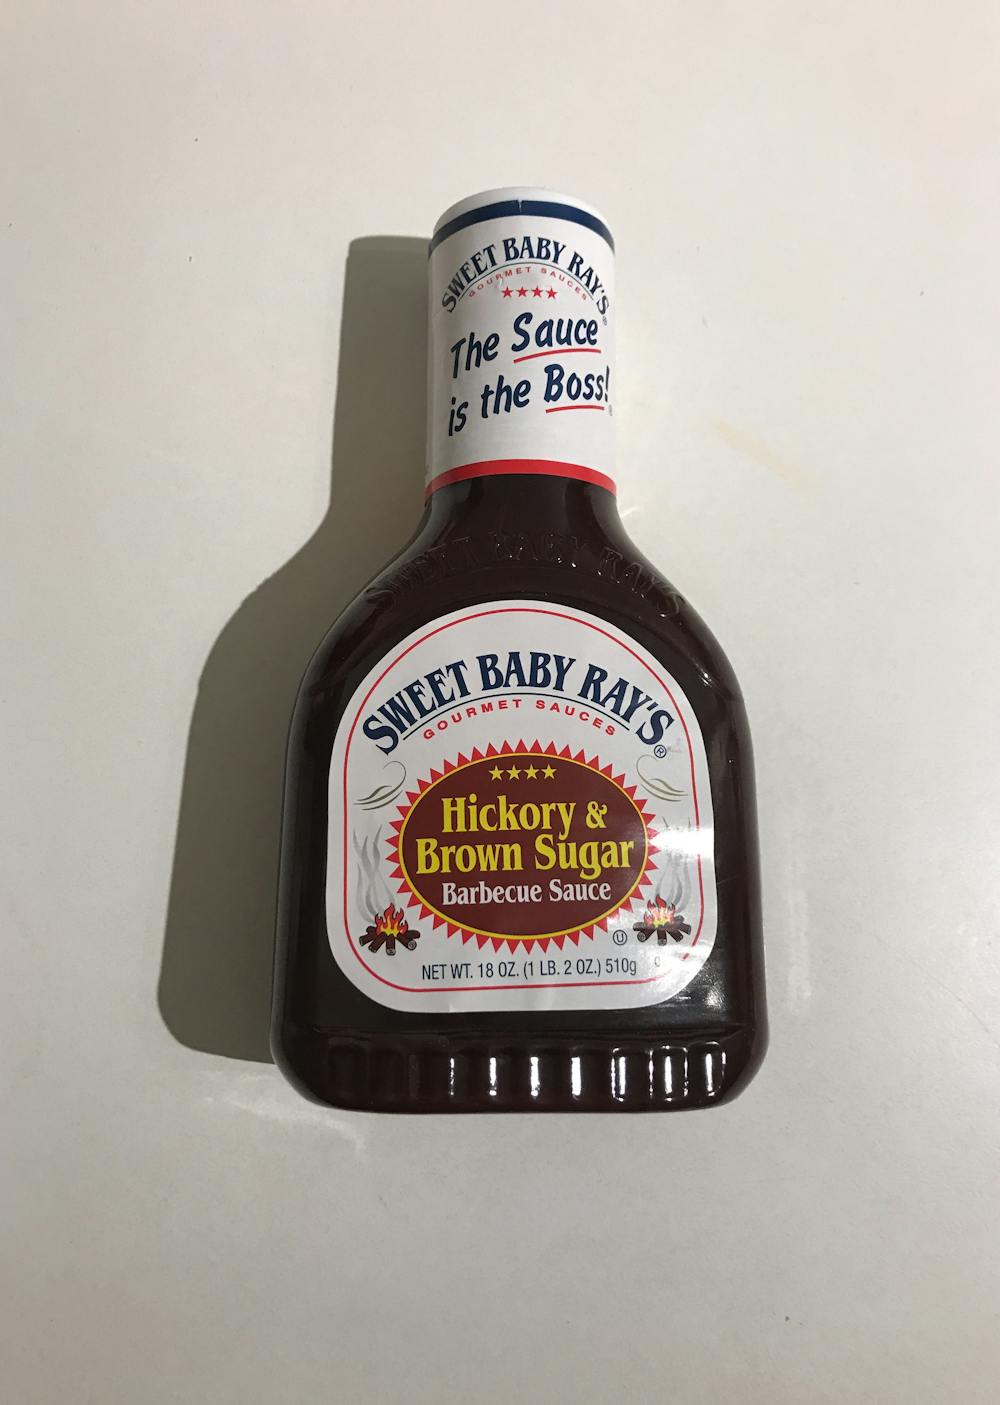 Hickory & brown sugar, babecue sauce, Sweet baby ray`s